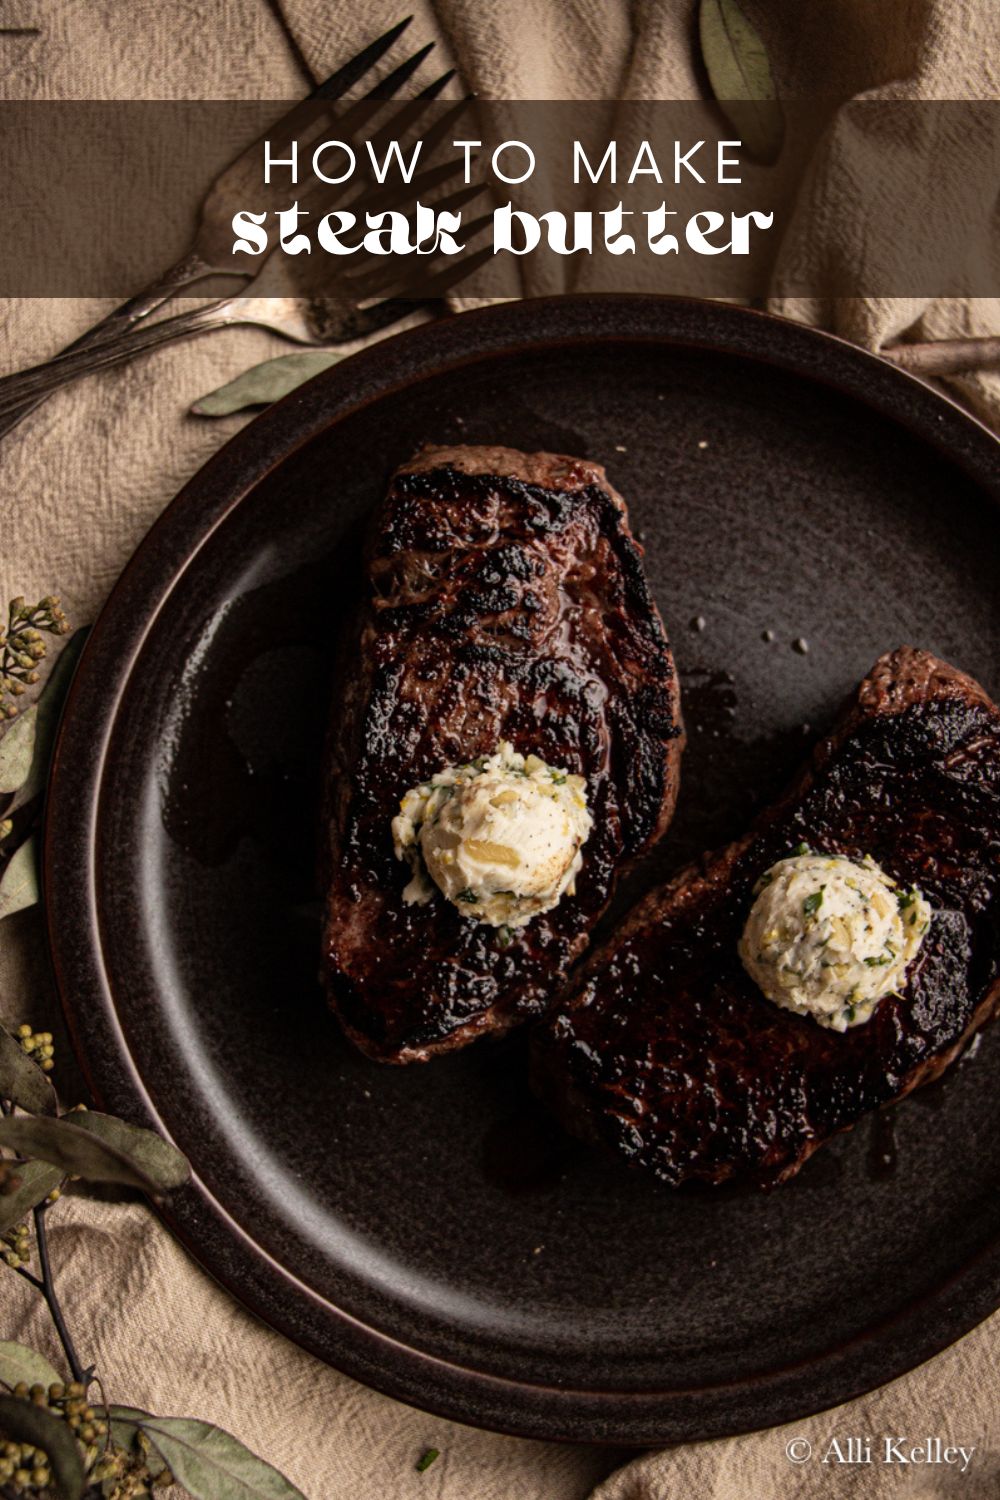 If you love steak, this recipe for steak herb butter will change your life! Not only will it add a delicious herby flavor to your dish, but it's also incredibly easy to make. The combination of fresh herbs, garlic, and lemon zest creates the most delicious compound herb butter - you won't want to eat your steak without it!